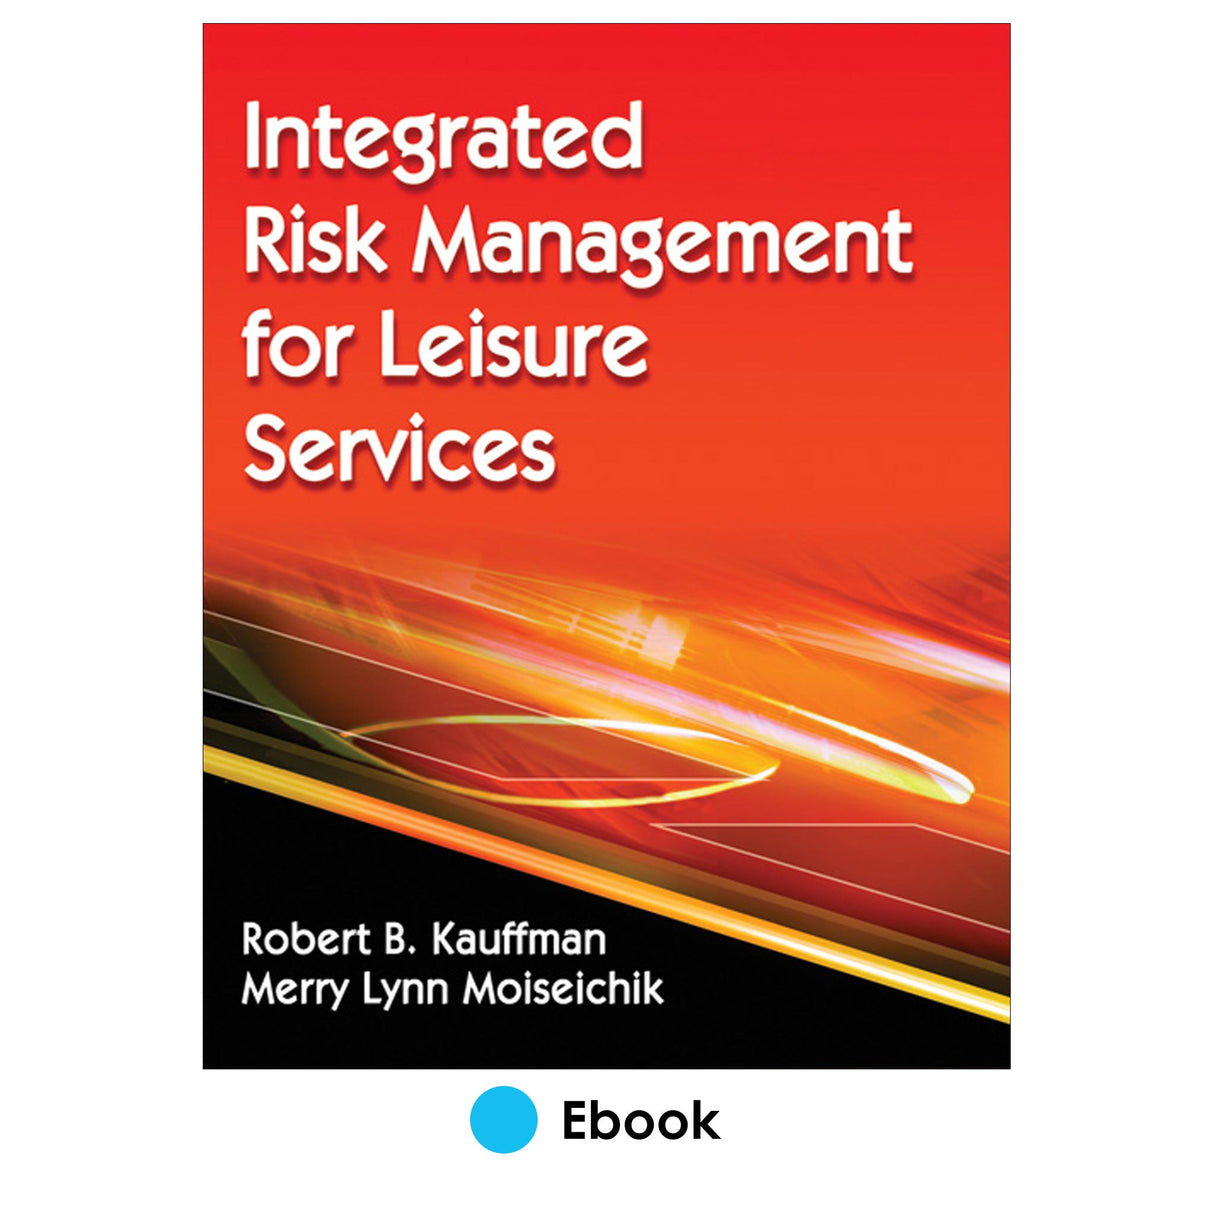 Integrated Risk Management for Leisure Services PDF